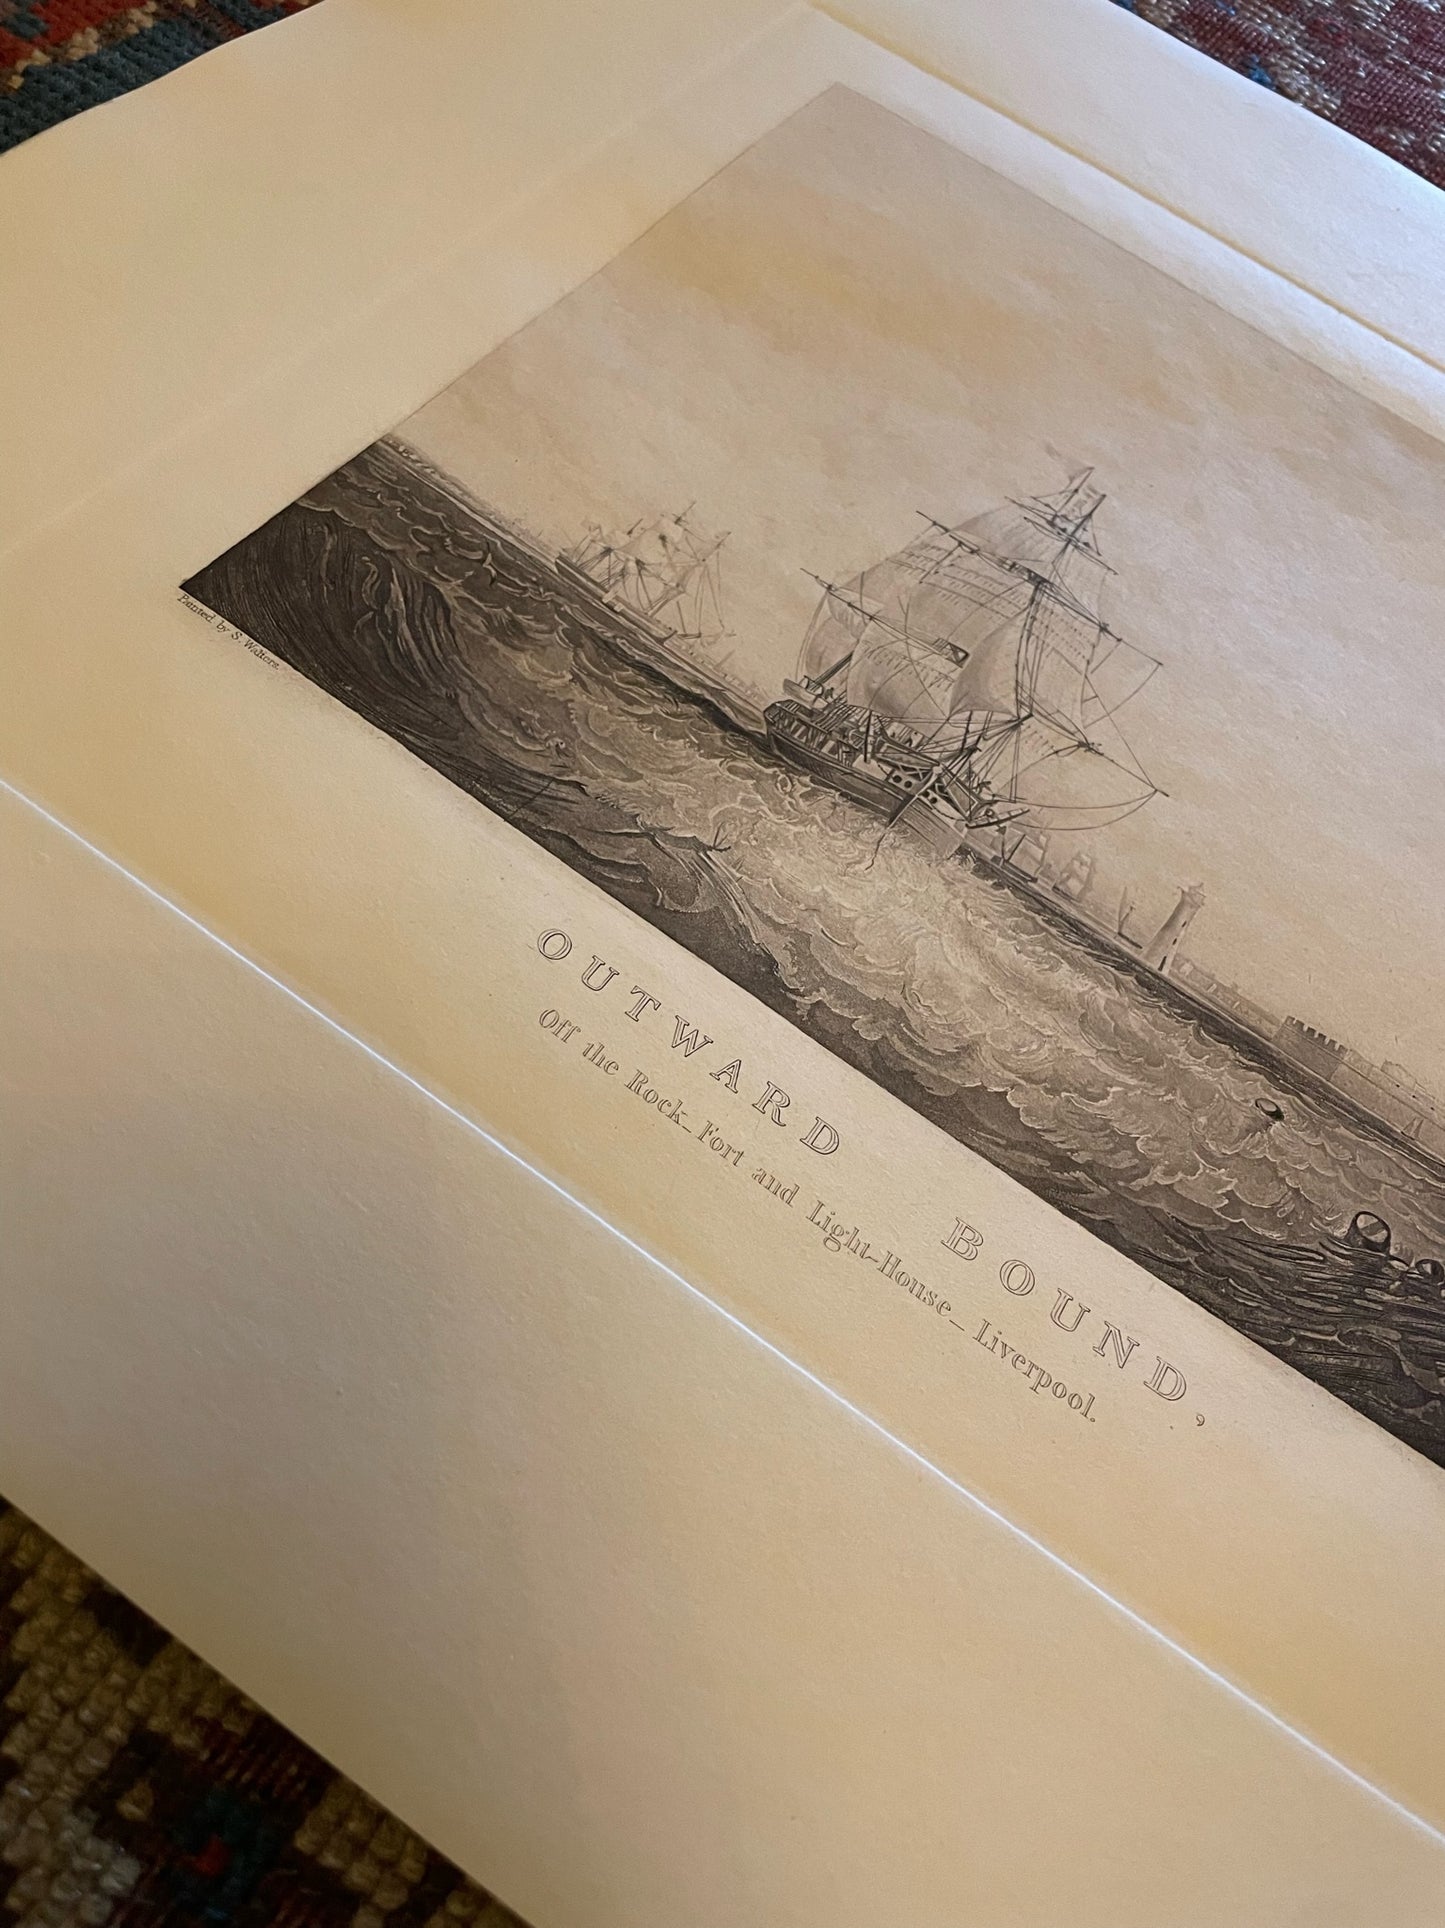 Engraving: "Outward Bound" by Samuel H. Walters